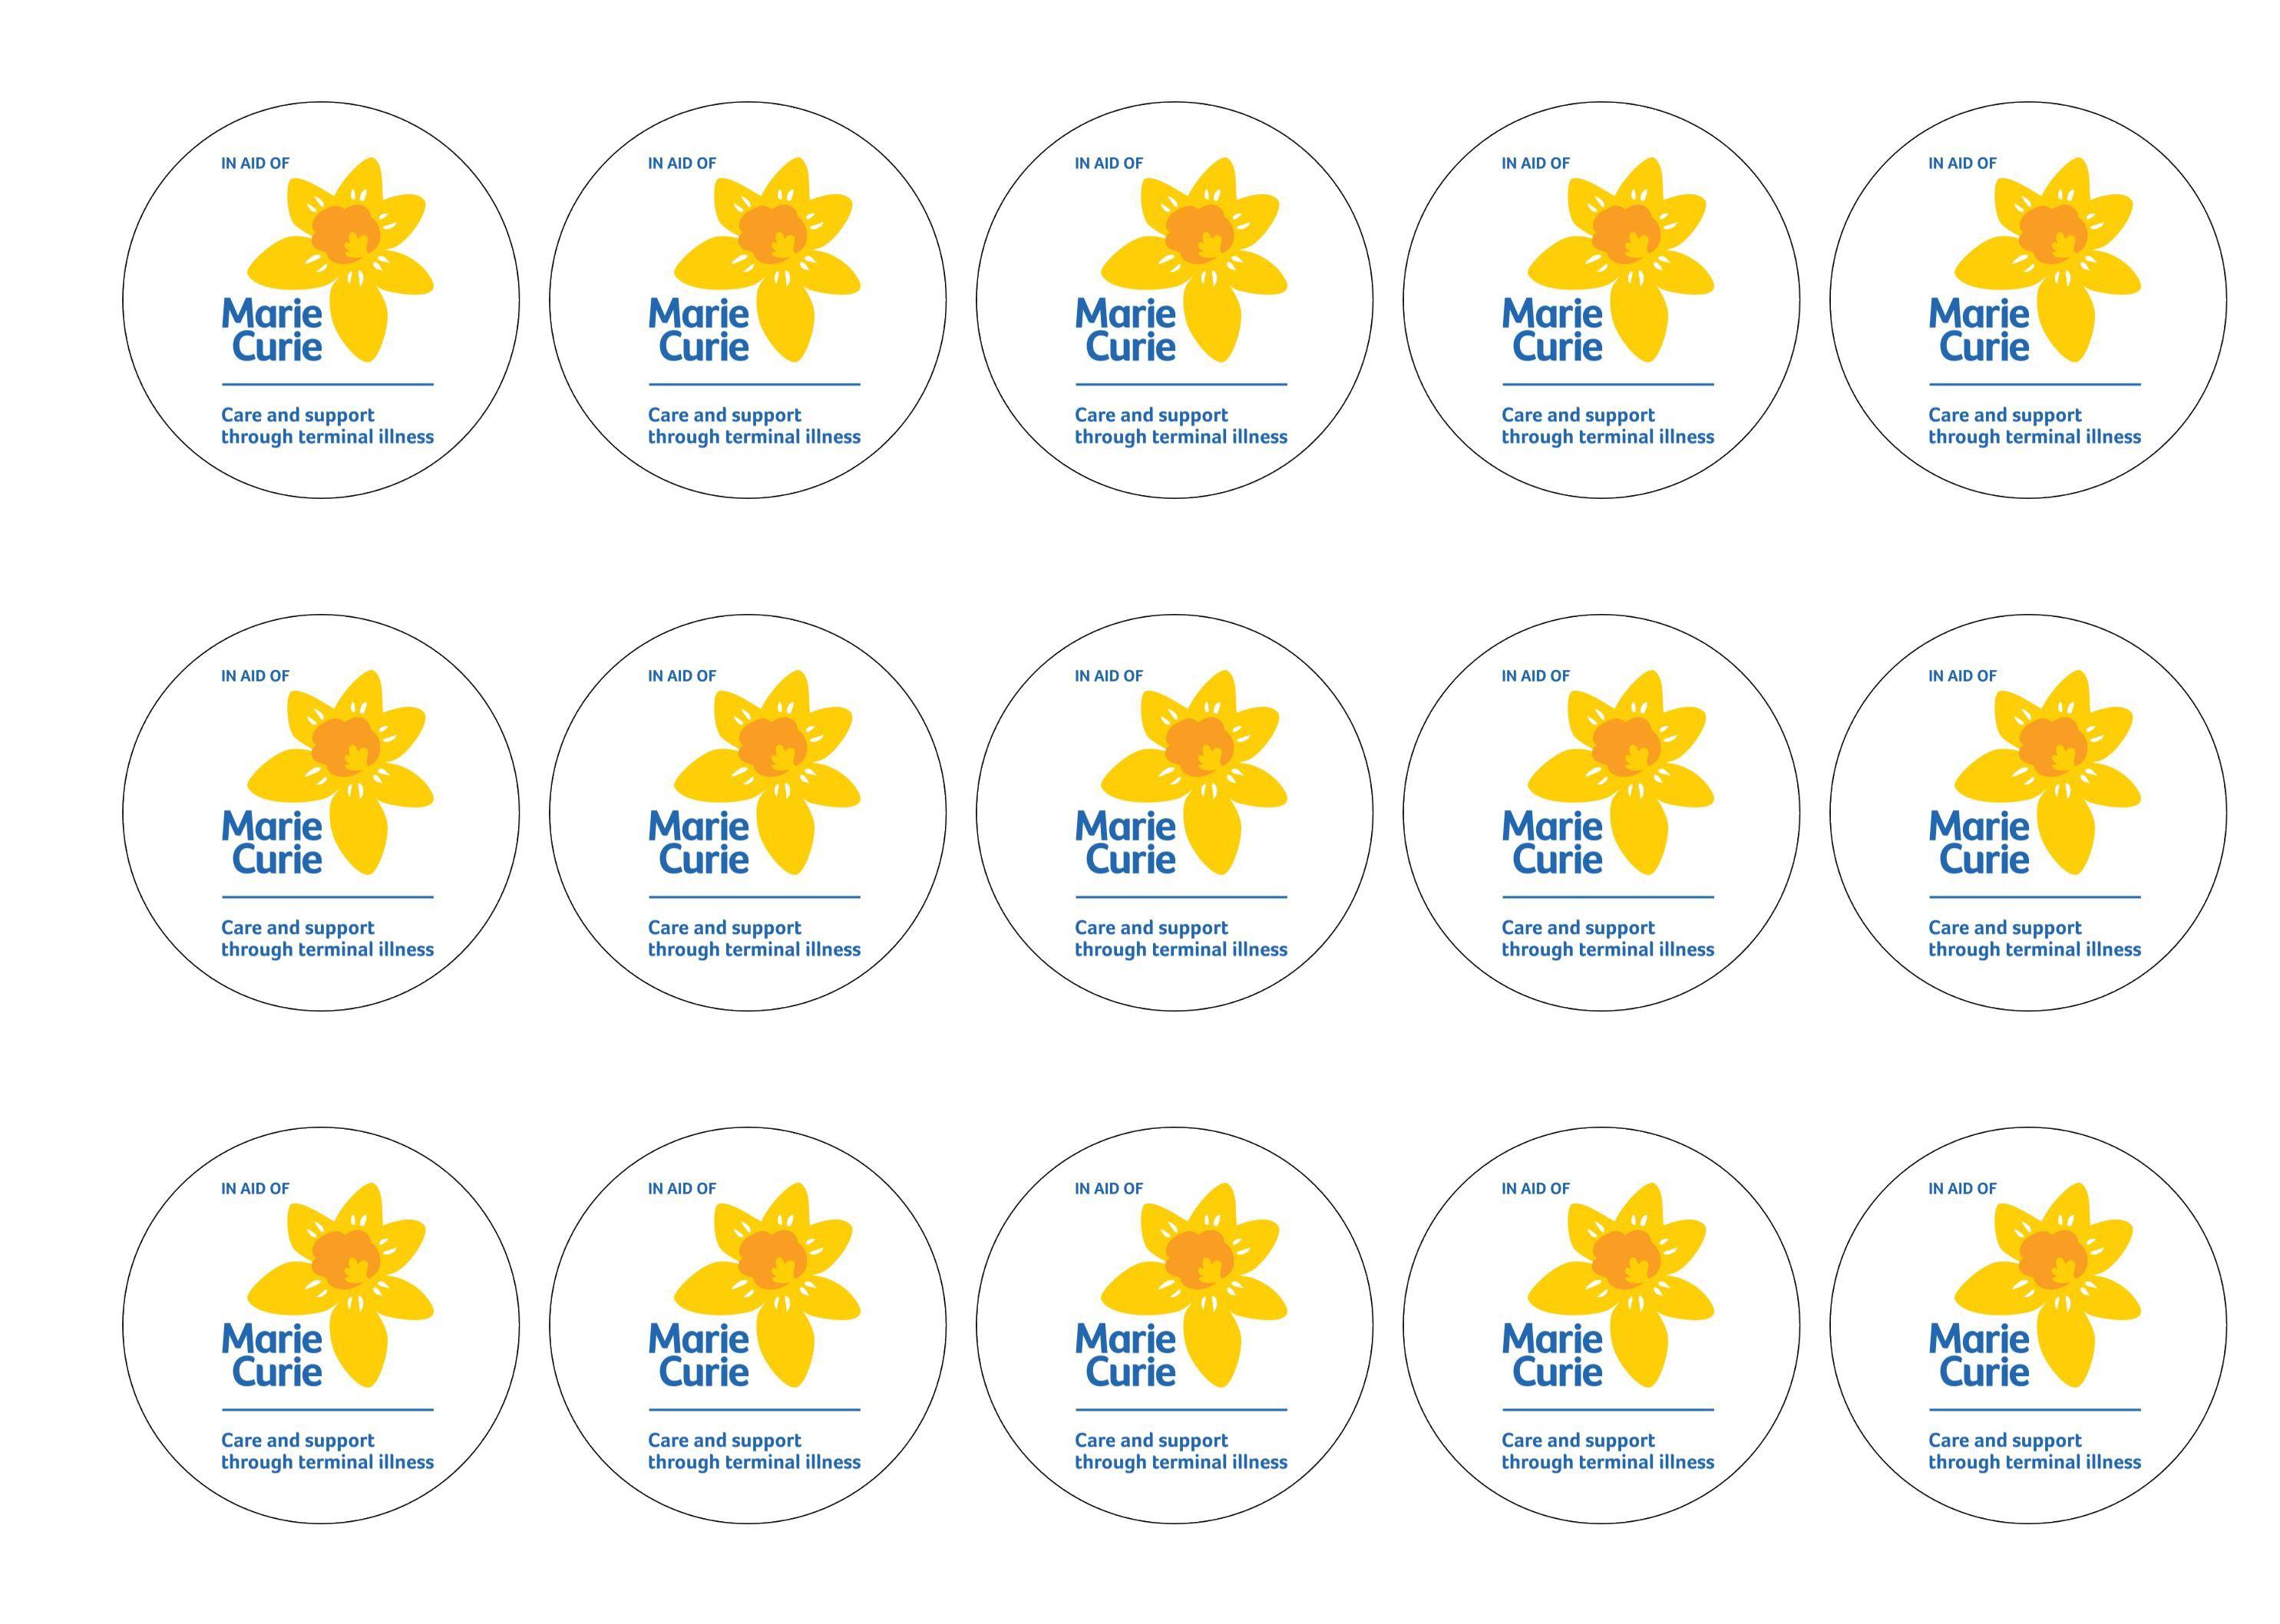 Printed edible charity cupcake and cake toppers to help raise funding for Marie Curie